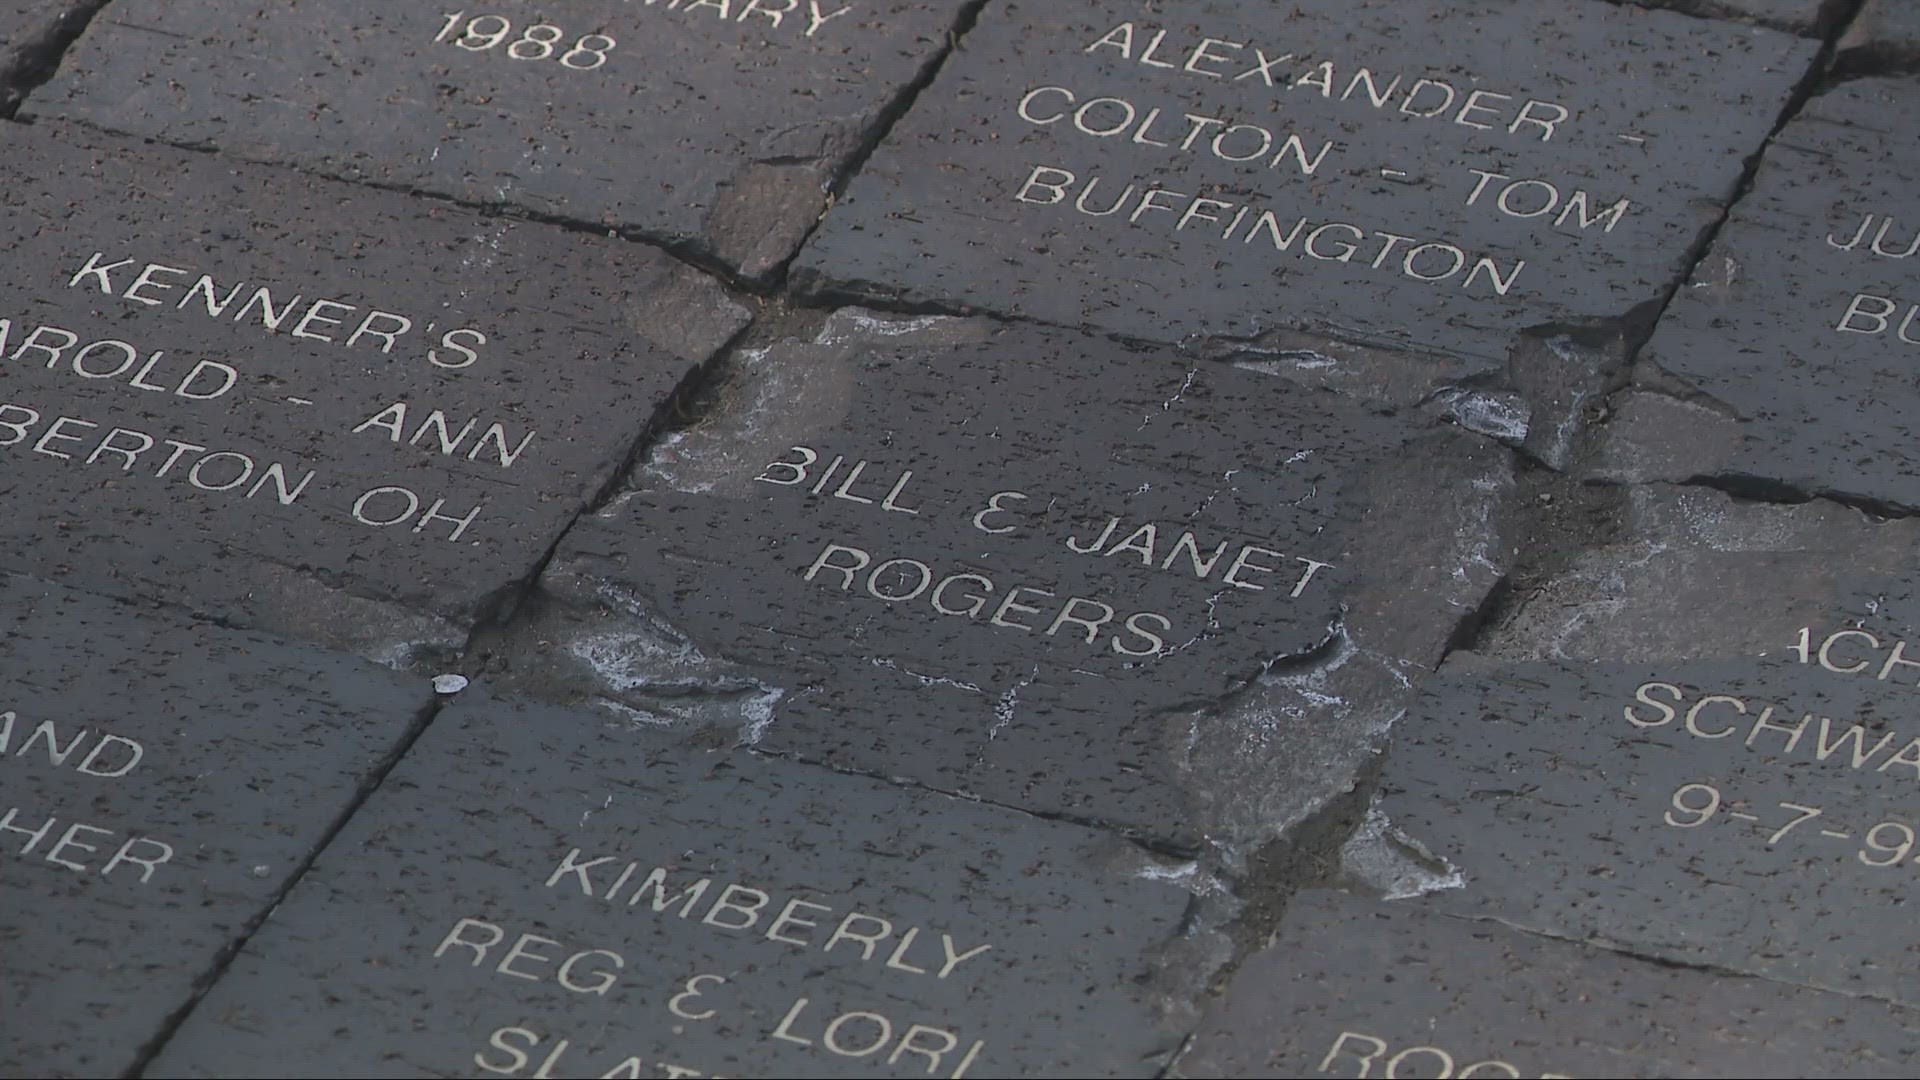 Fans originally purchased the personalized bricks in 1993 to help fund the Feller statue, but they are now being called a 'safety hazard.'